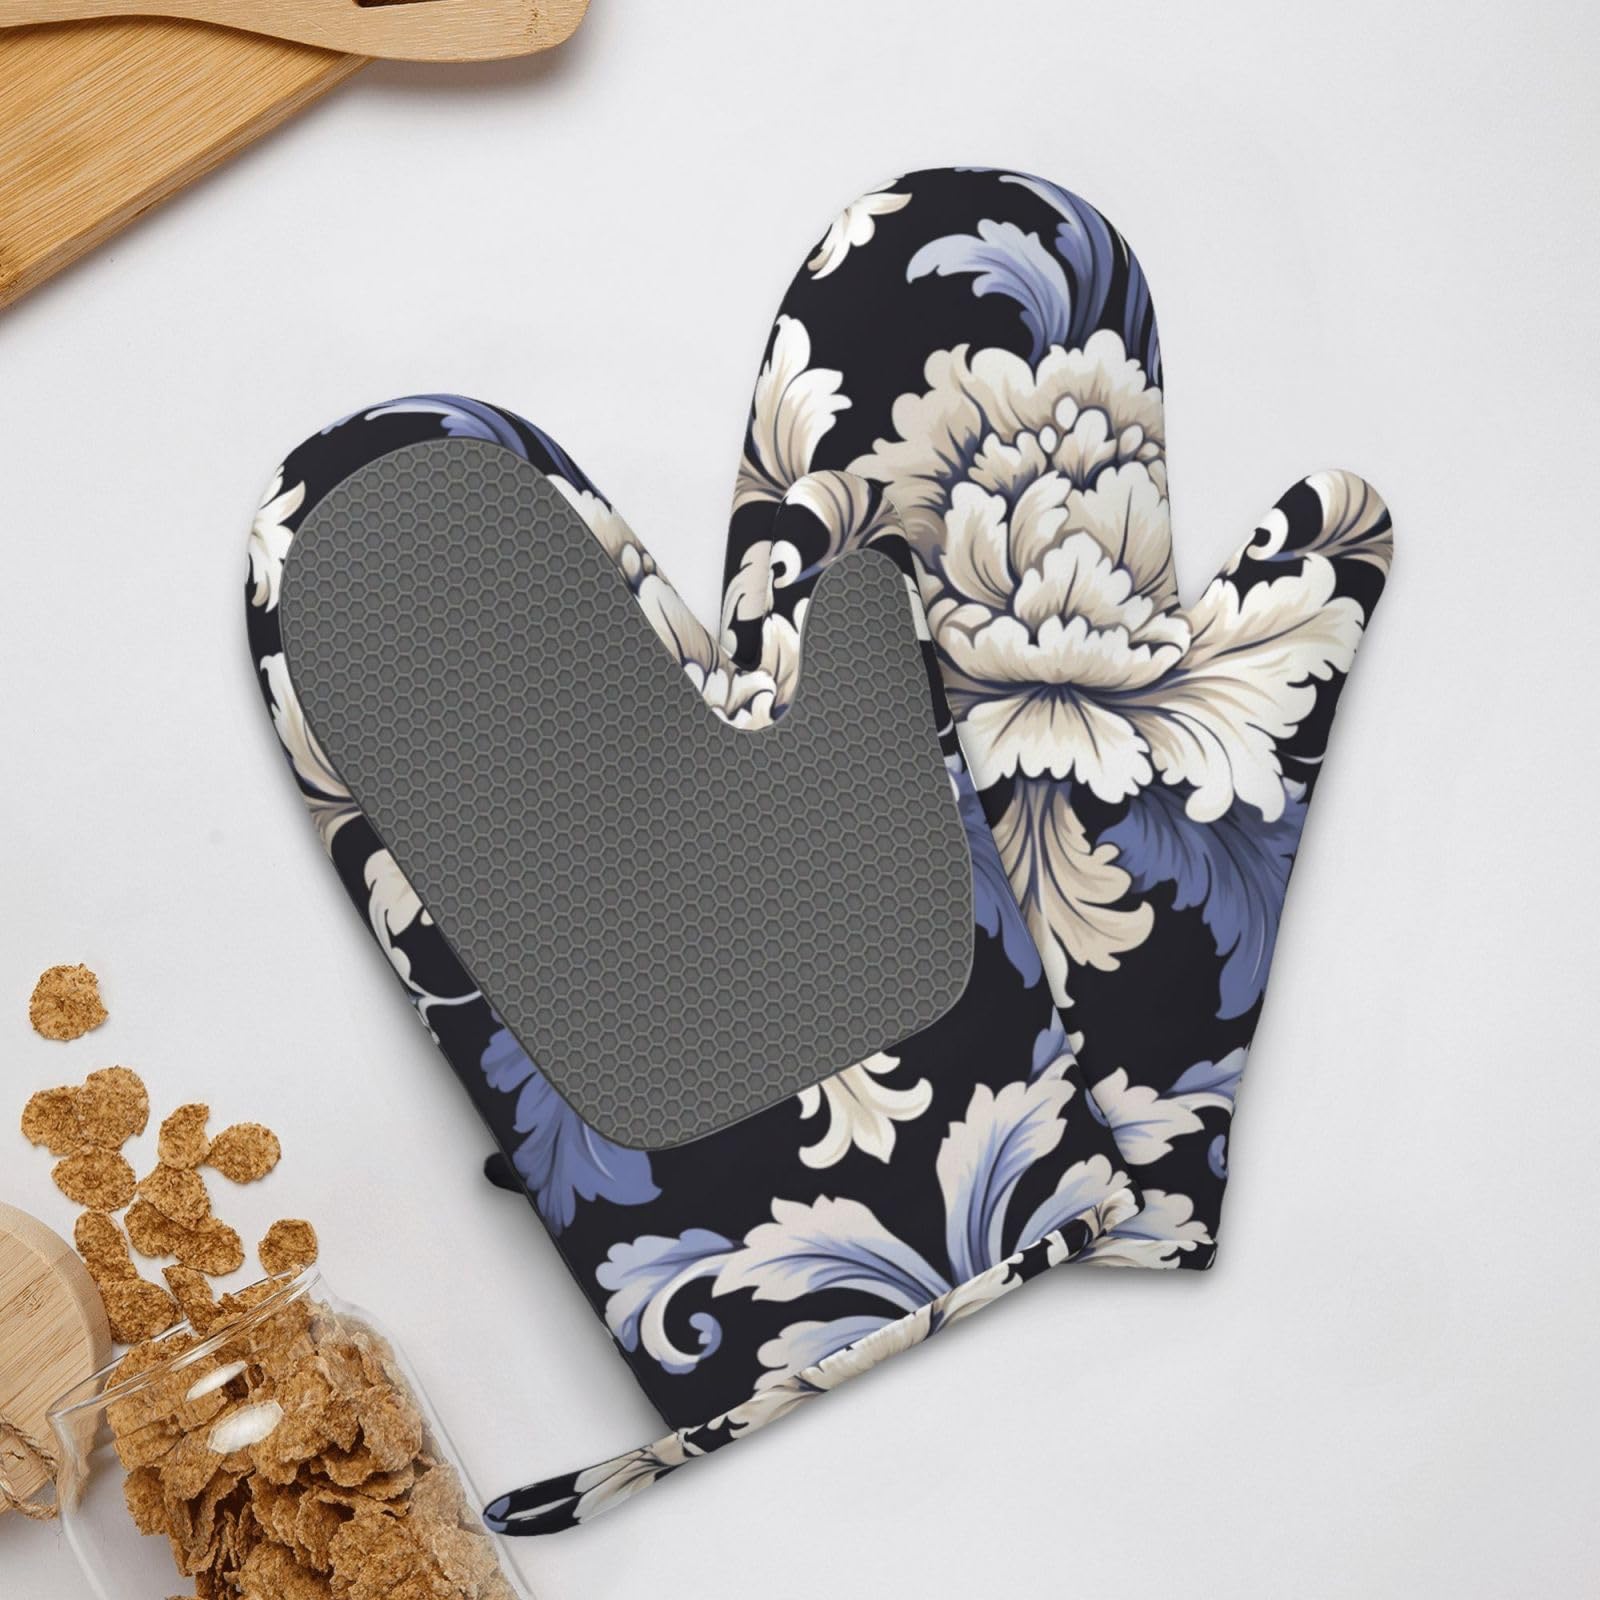 Damask Pattern Printed Oven Mitts Heat Resistant Oven Gloves Non-Slip Silicone Kitchen Gloves for Cooking Baking BBQ Gloves 1 Pair